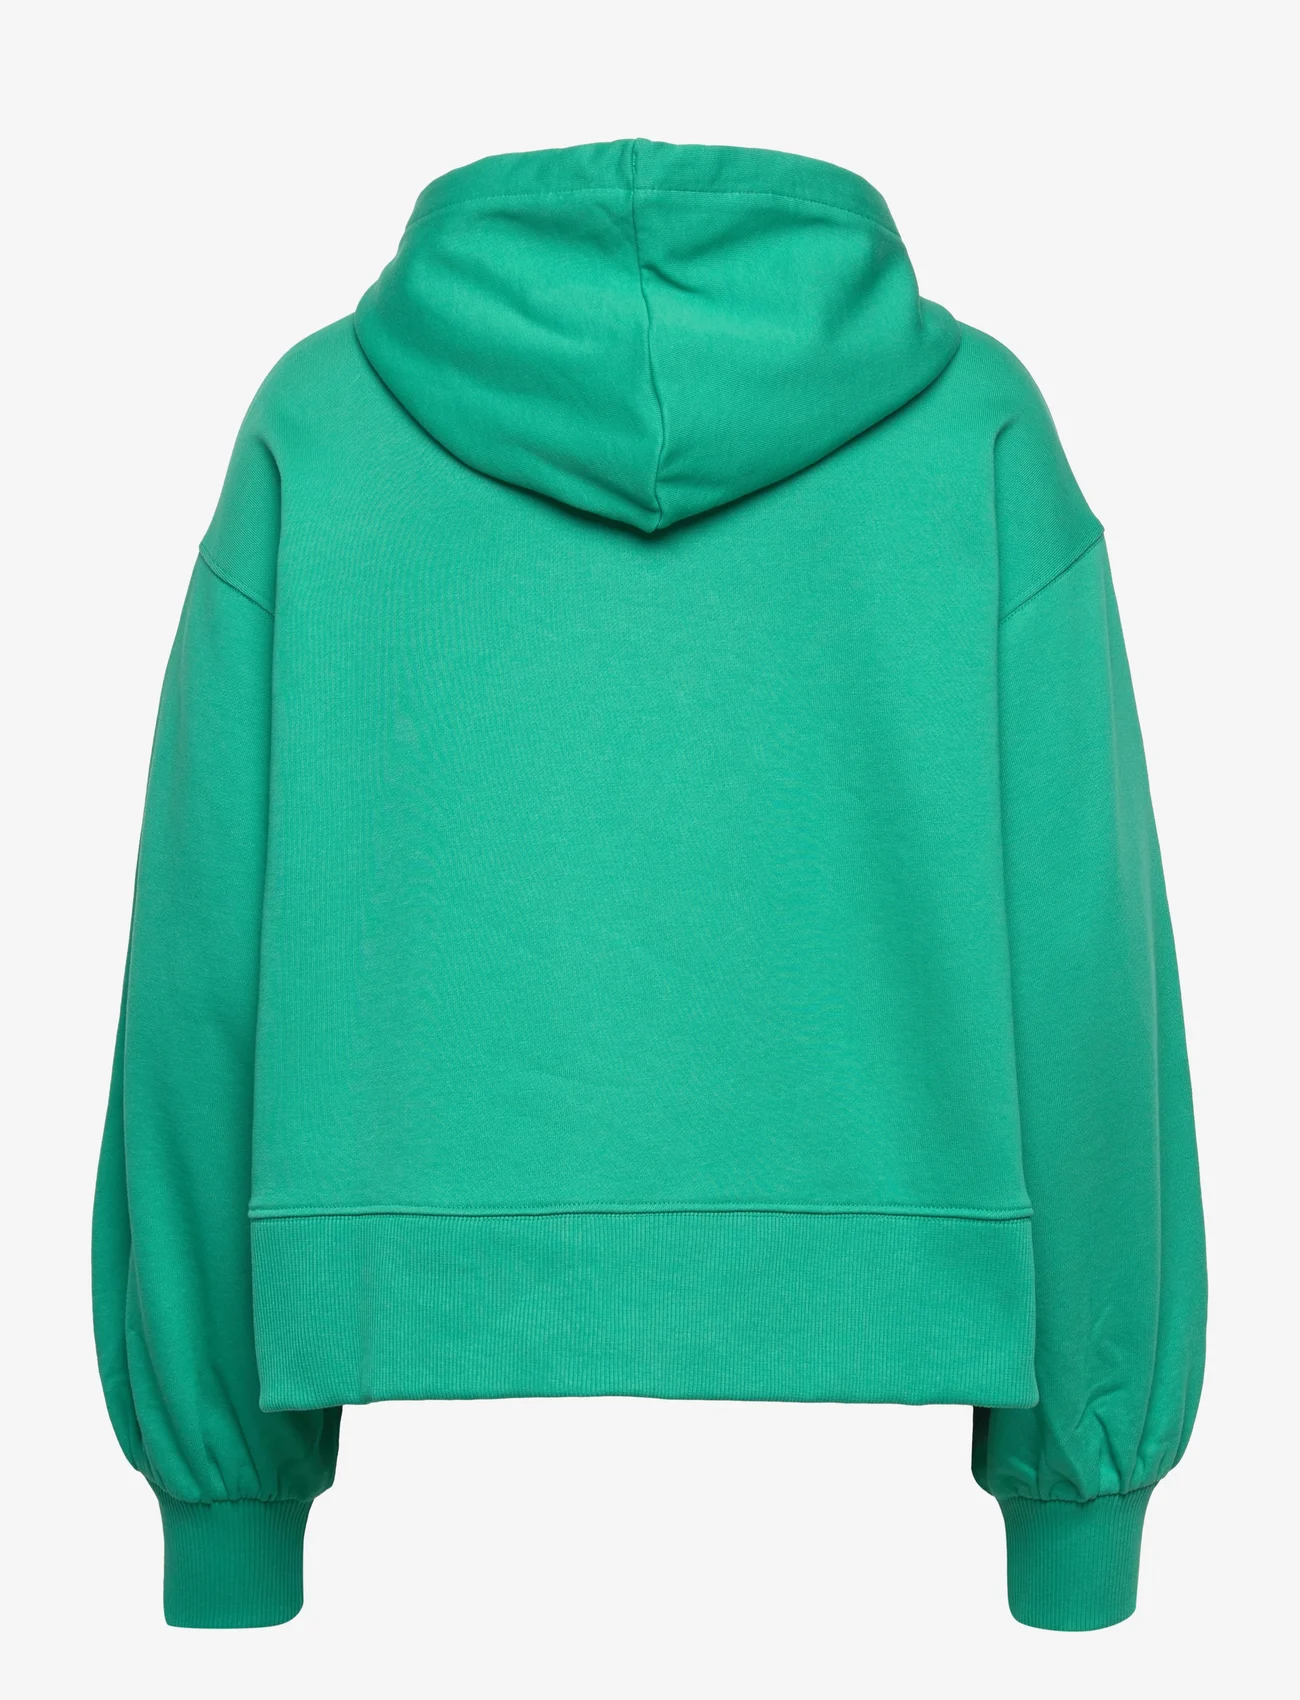 Tommy Hilfiger - ICON RELAXED ICON HOODY - hoodies - icon green - 1